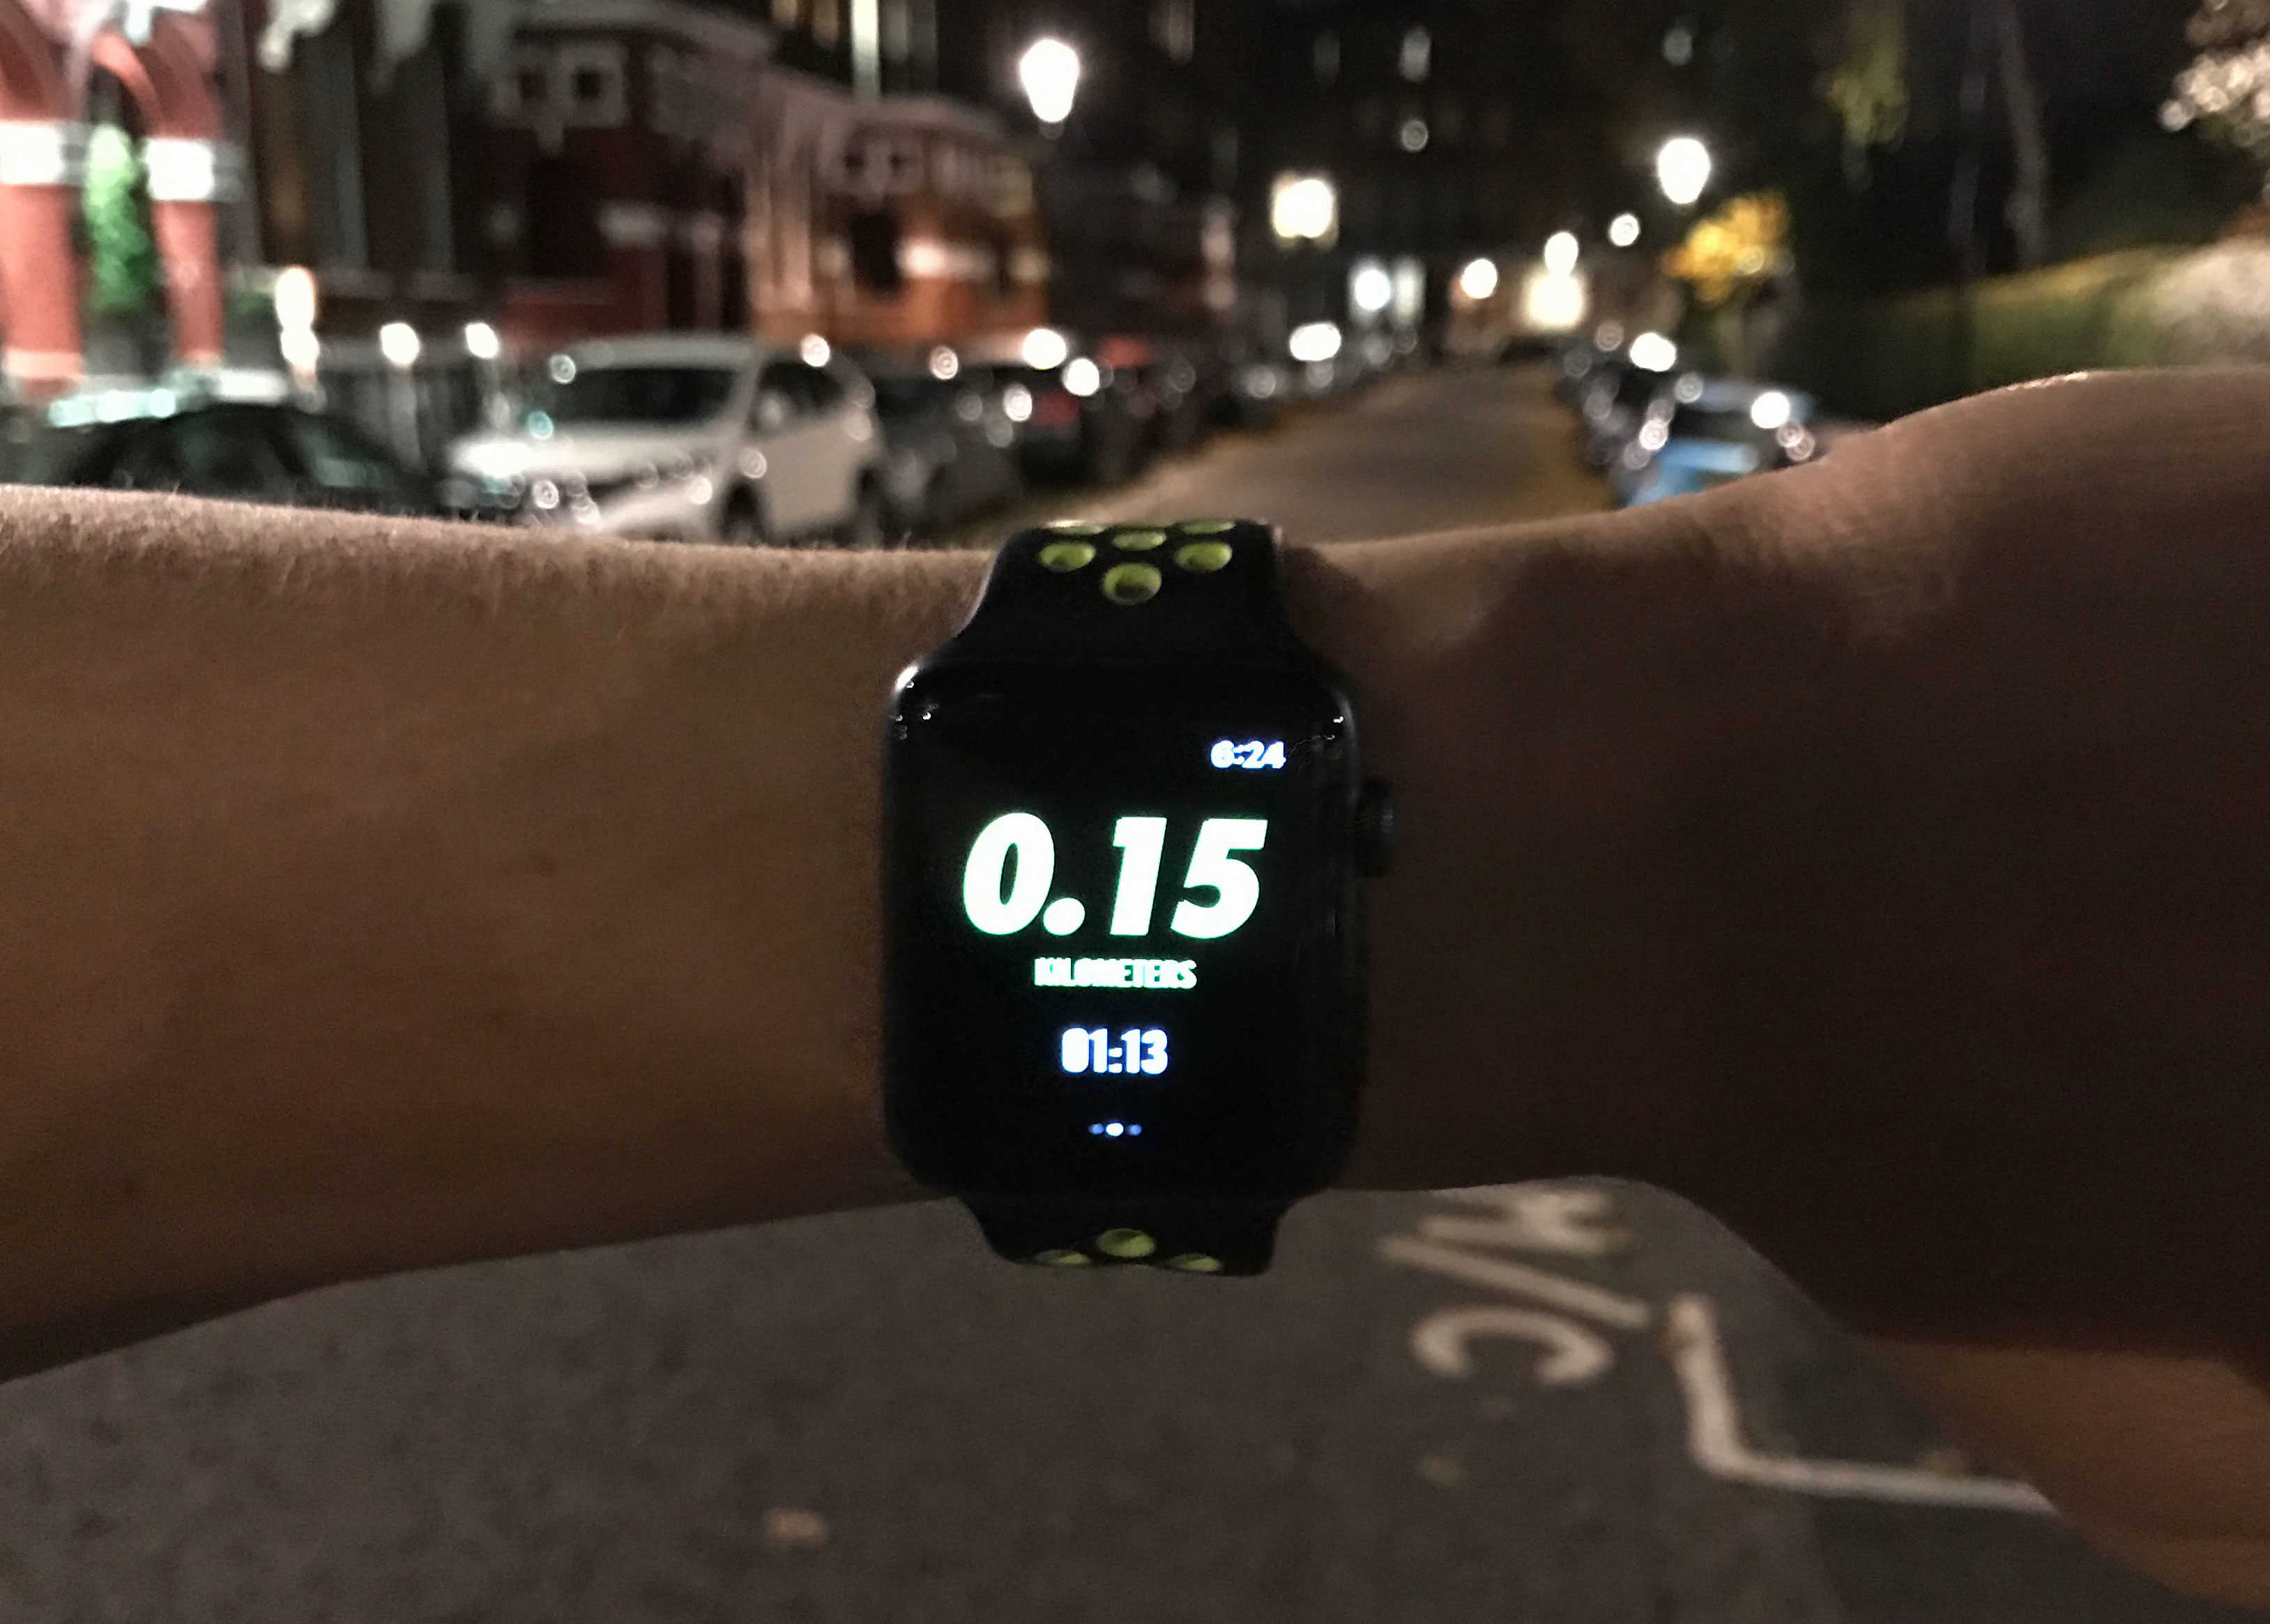 The Apple Watch display is perfect for nocturnal runners